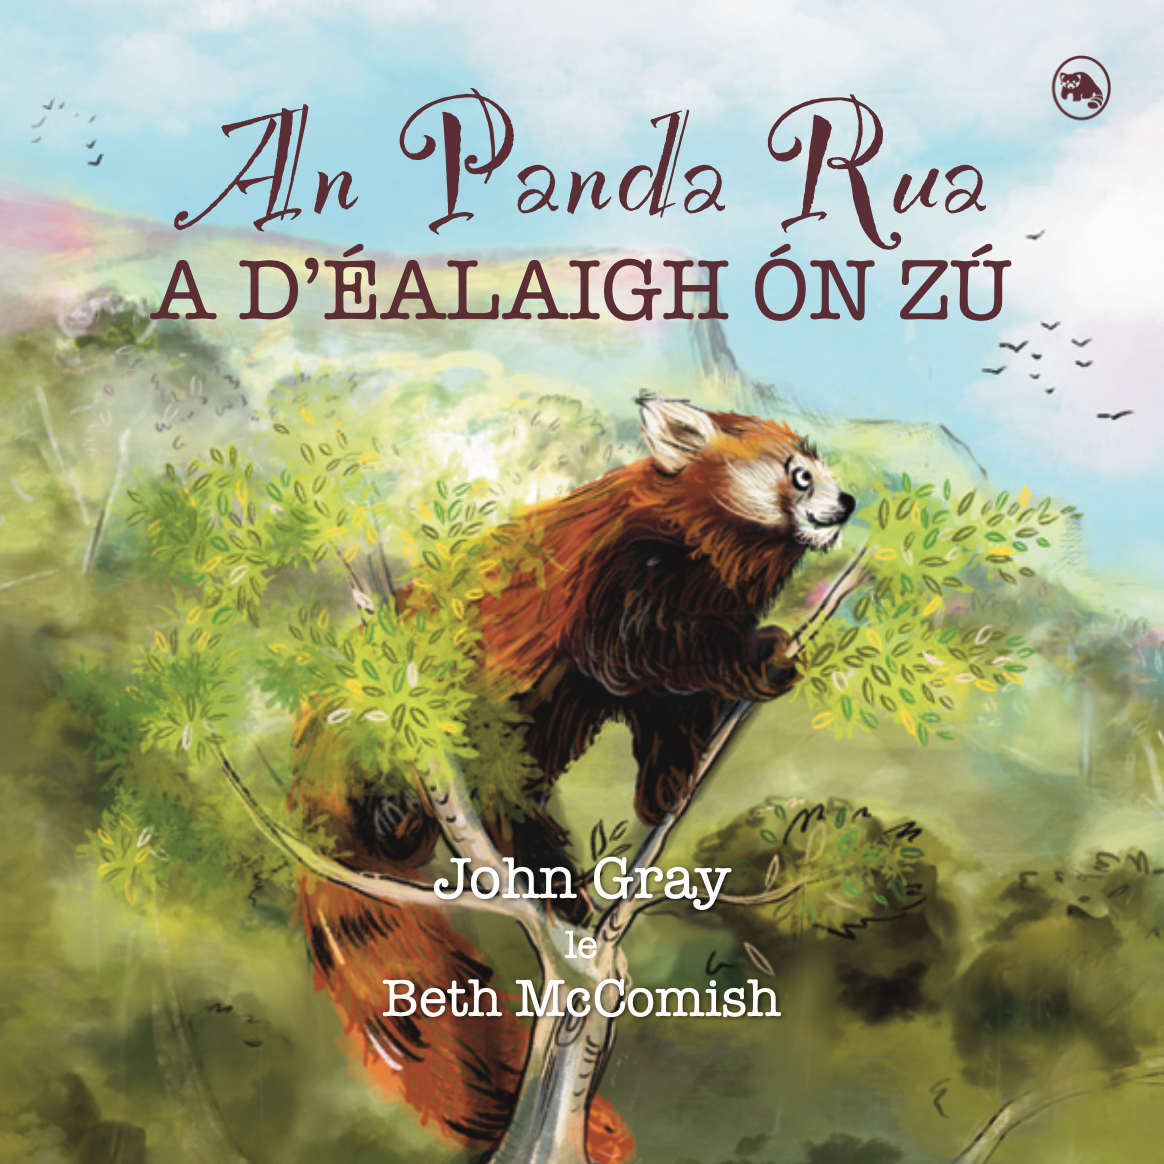 ADVENTURE: John Gray\'s new children\'s book is an imaginative account a red panda\'s escape from the zoo